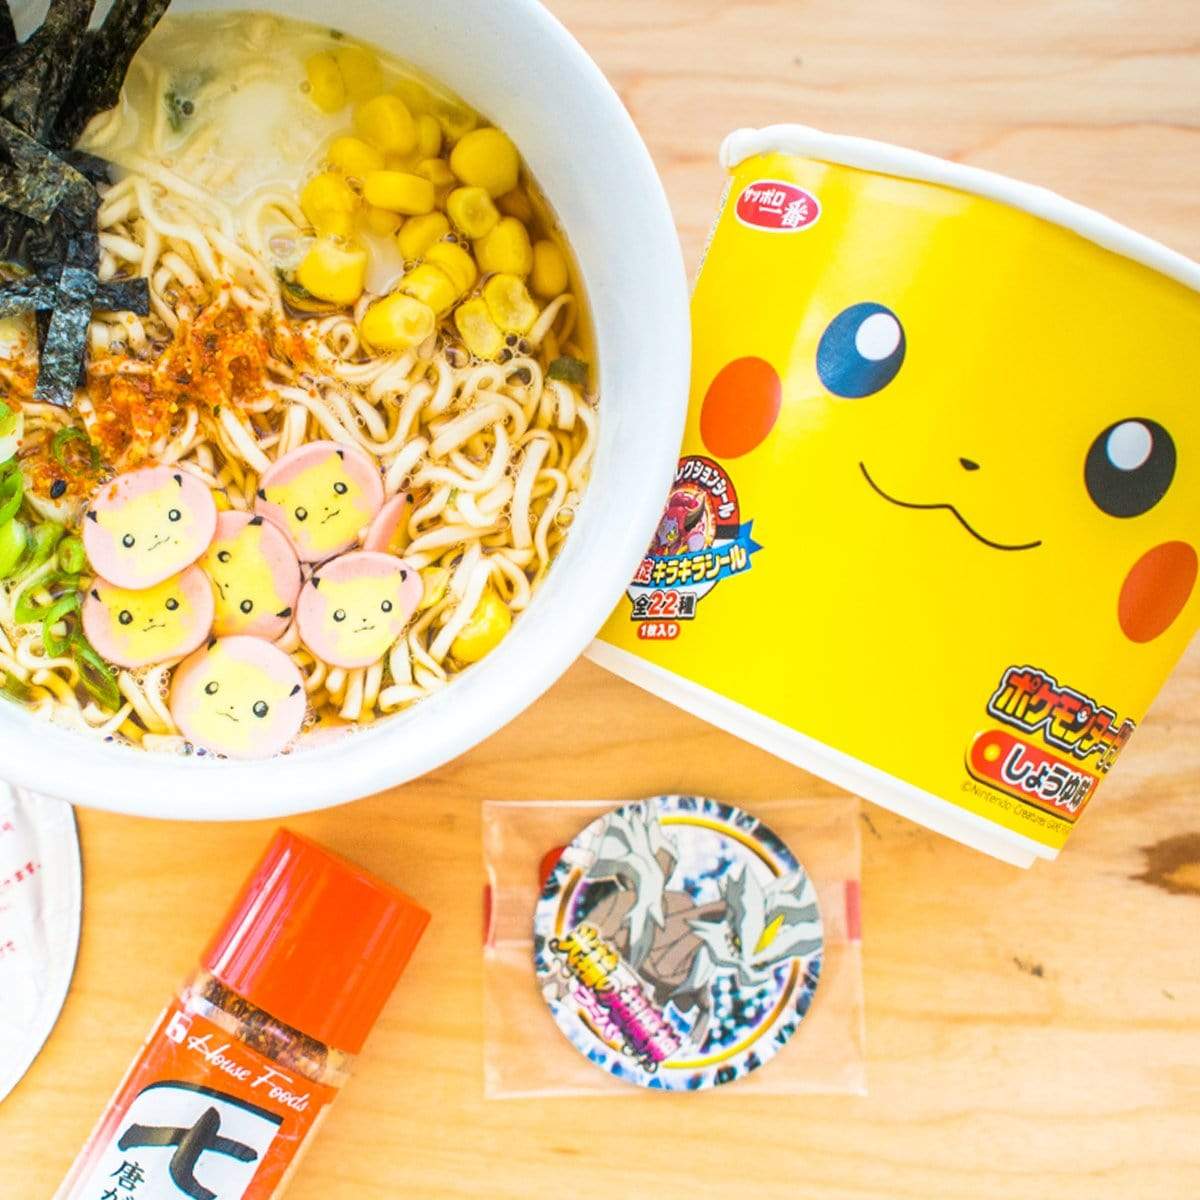 Your favorite anime is here, now with its own ramen! Shoyu (soy sauce) is one of the most famous ramen broths in Japan, and this one comes with green onions, corn, and little Pikachu kamaboko (fish cakes) inside! And on top of that, it even comes with a special Pokémon collector's sticker inside. Pikachu gives his stamp of approval!    